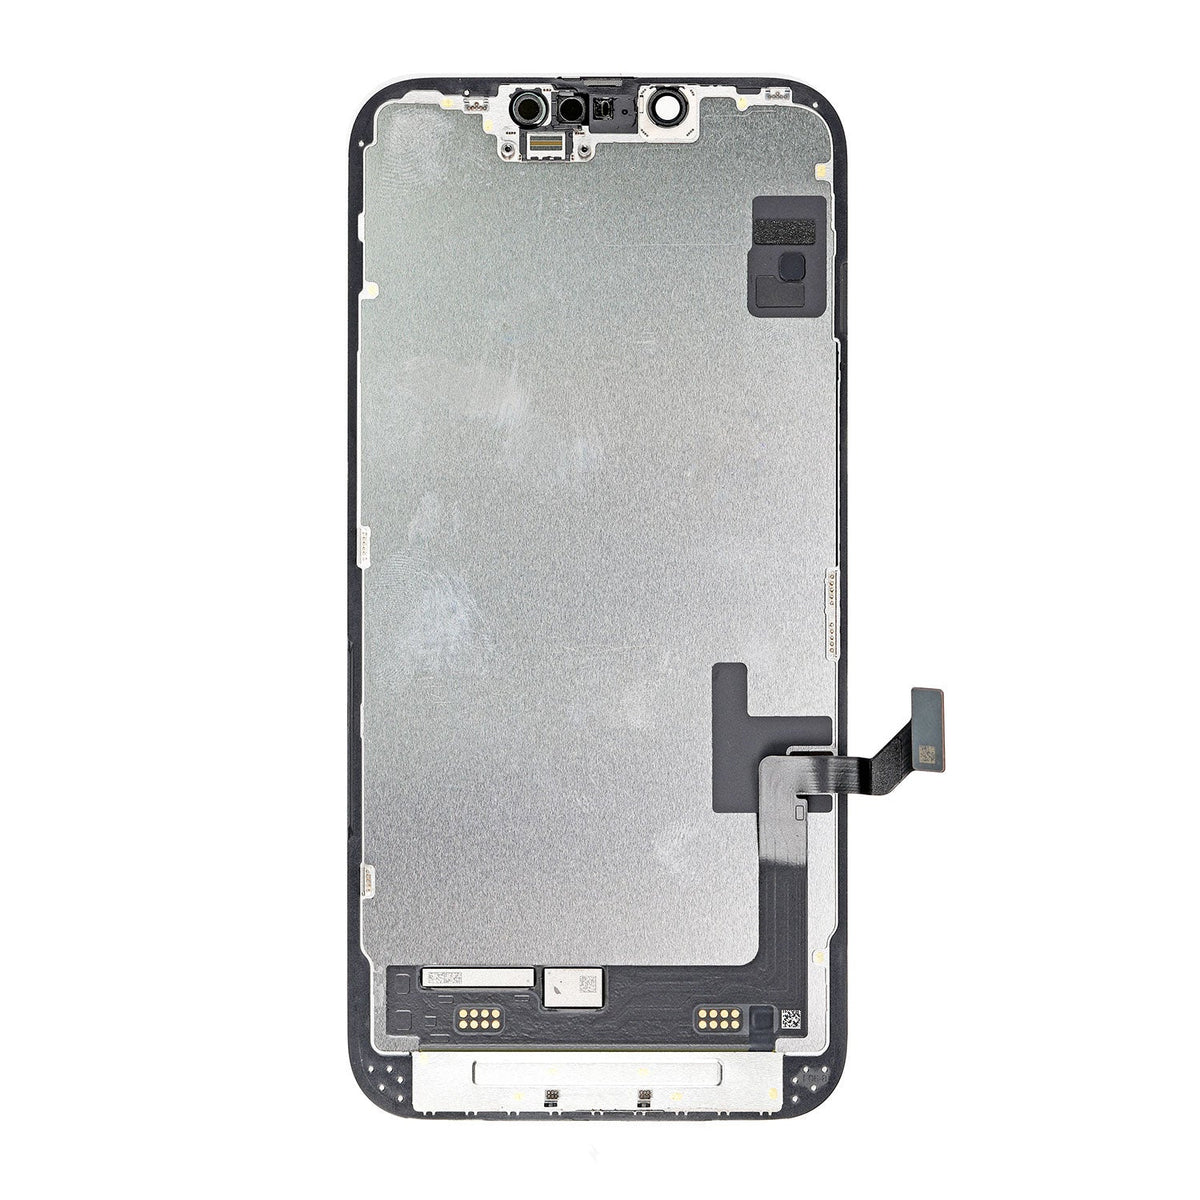 Replacement for iPhone 14 OLED Screen Digitizer Assembly - Black